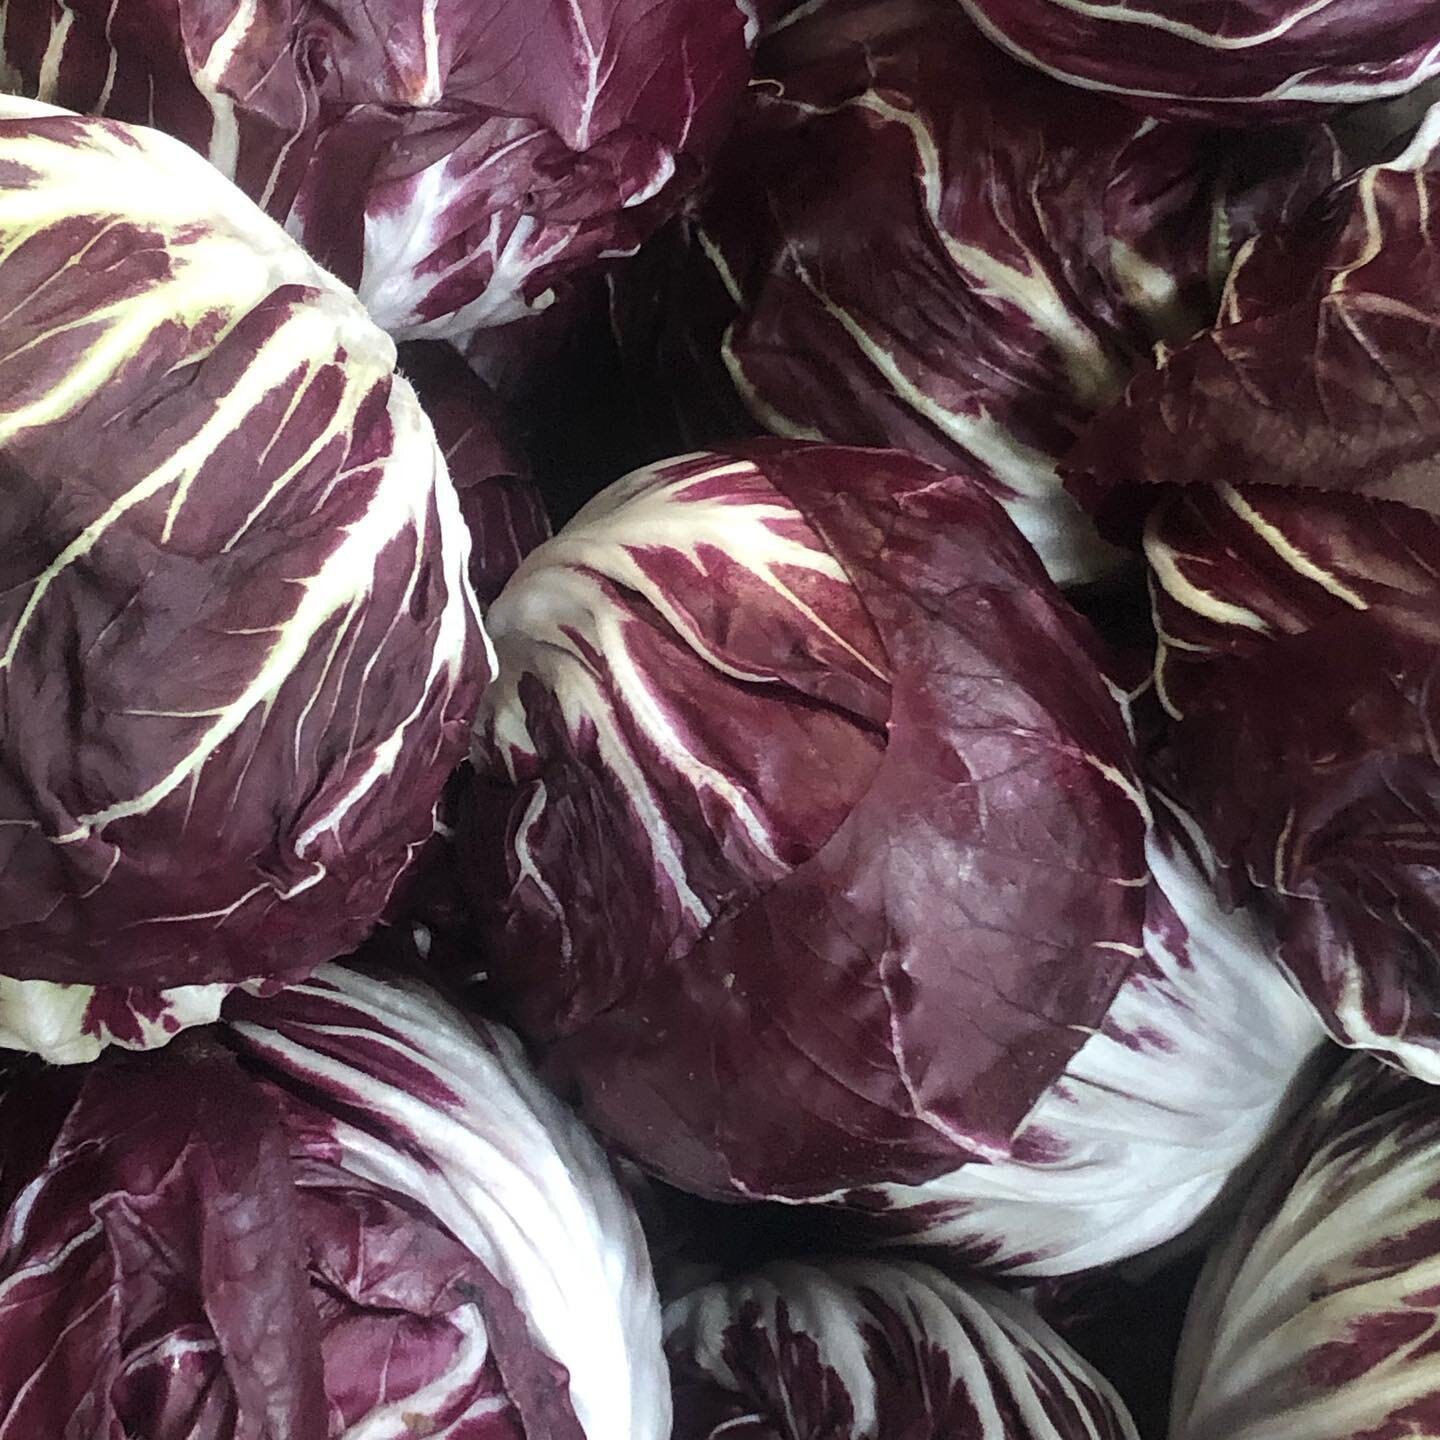 Come climb into a little basket of radicchio heaven- we&rsquo;re at the @berkgrown holiday market today until 2! Find us at the Housy Dome and load up on all the fixings for your holiday table- roots, potatoes, garlic, squashes and more.